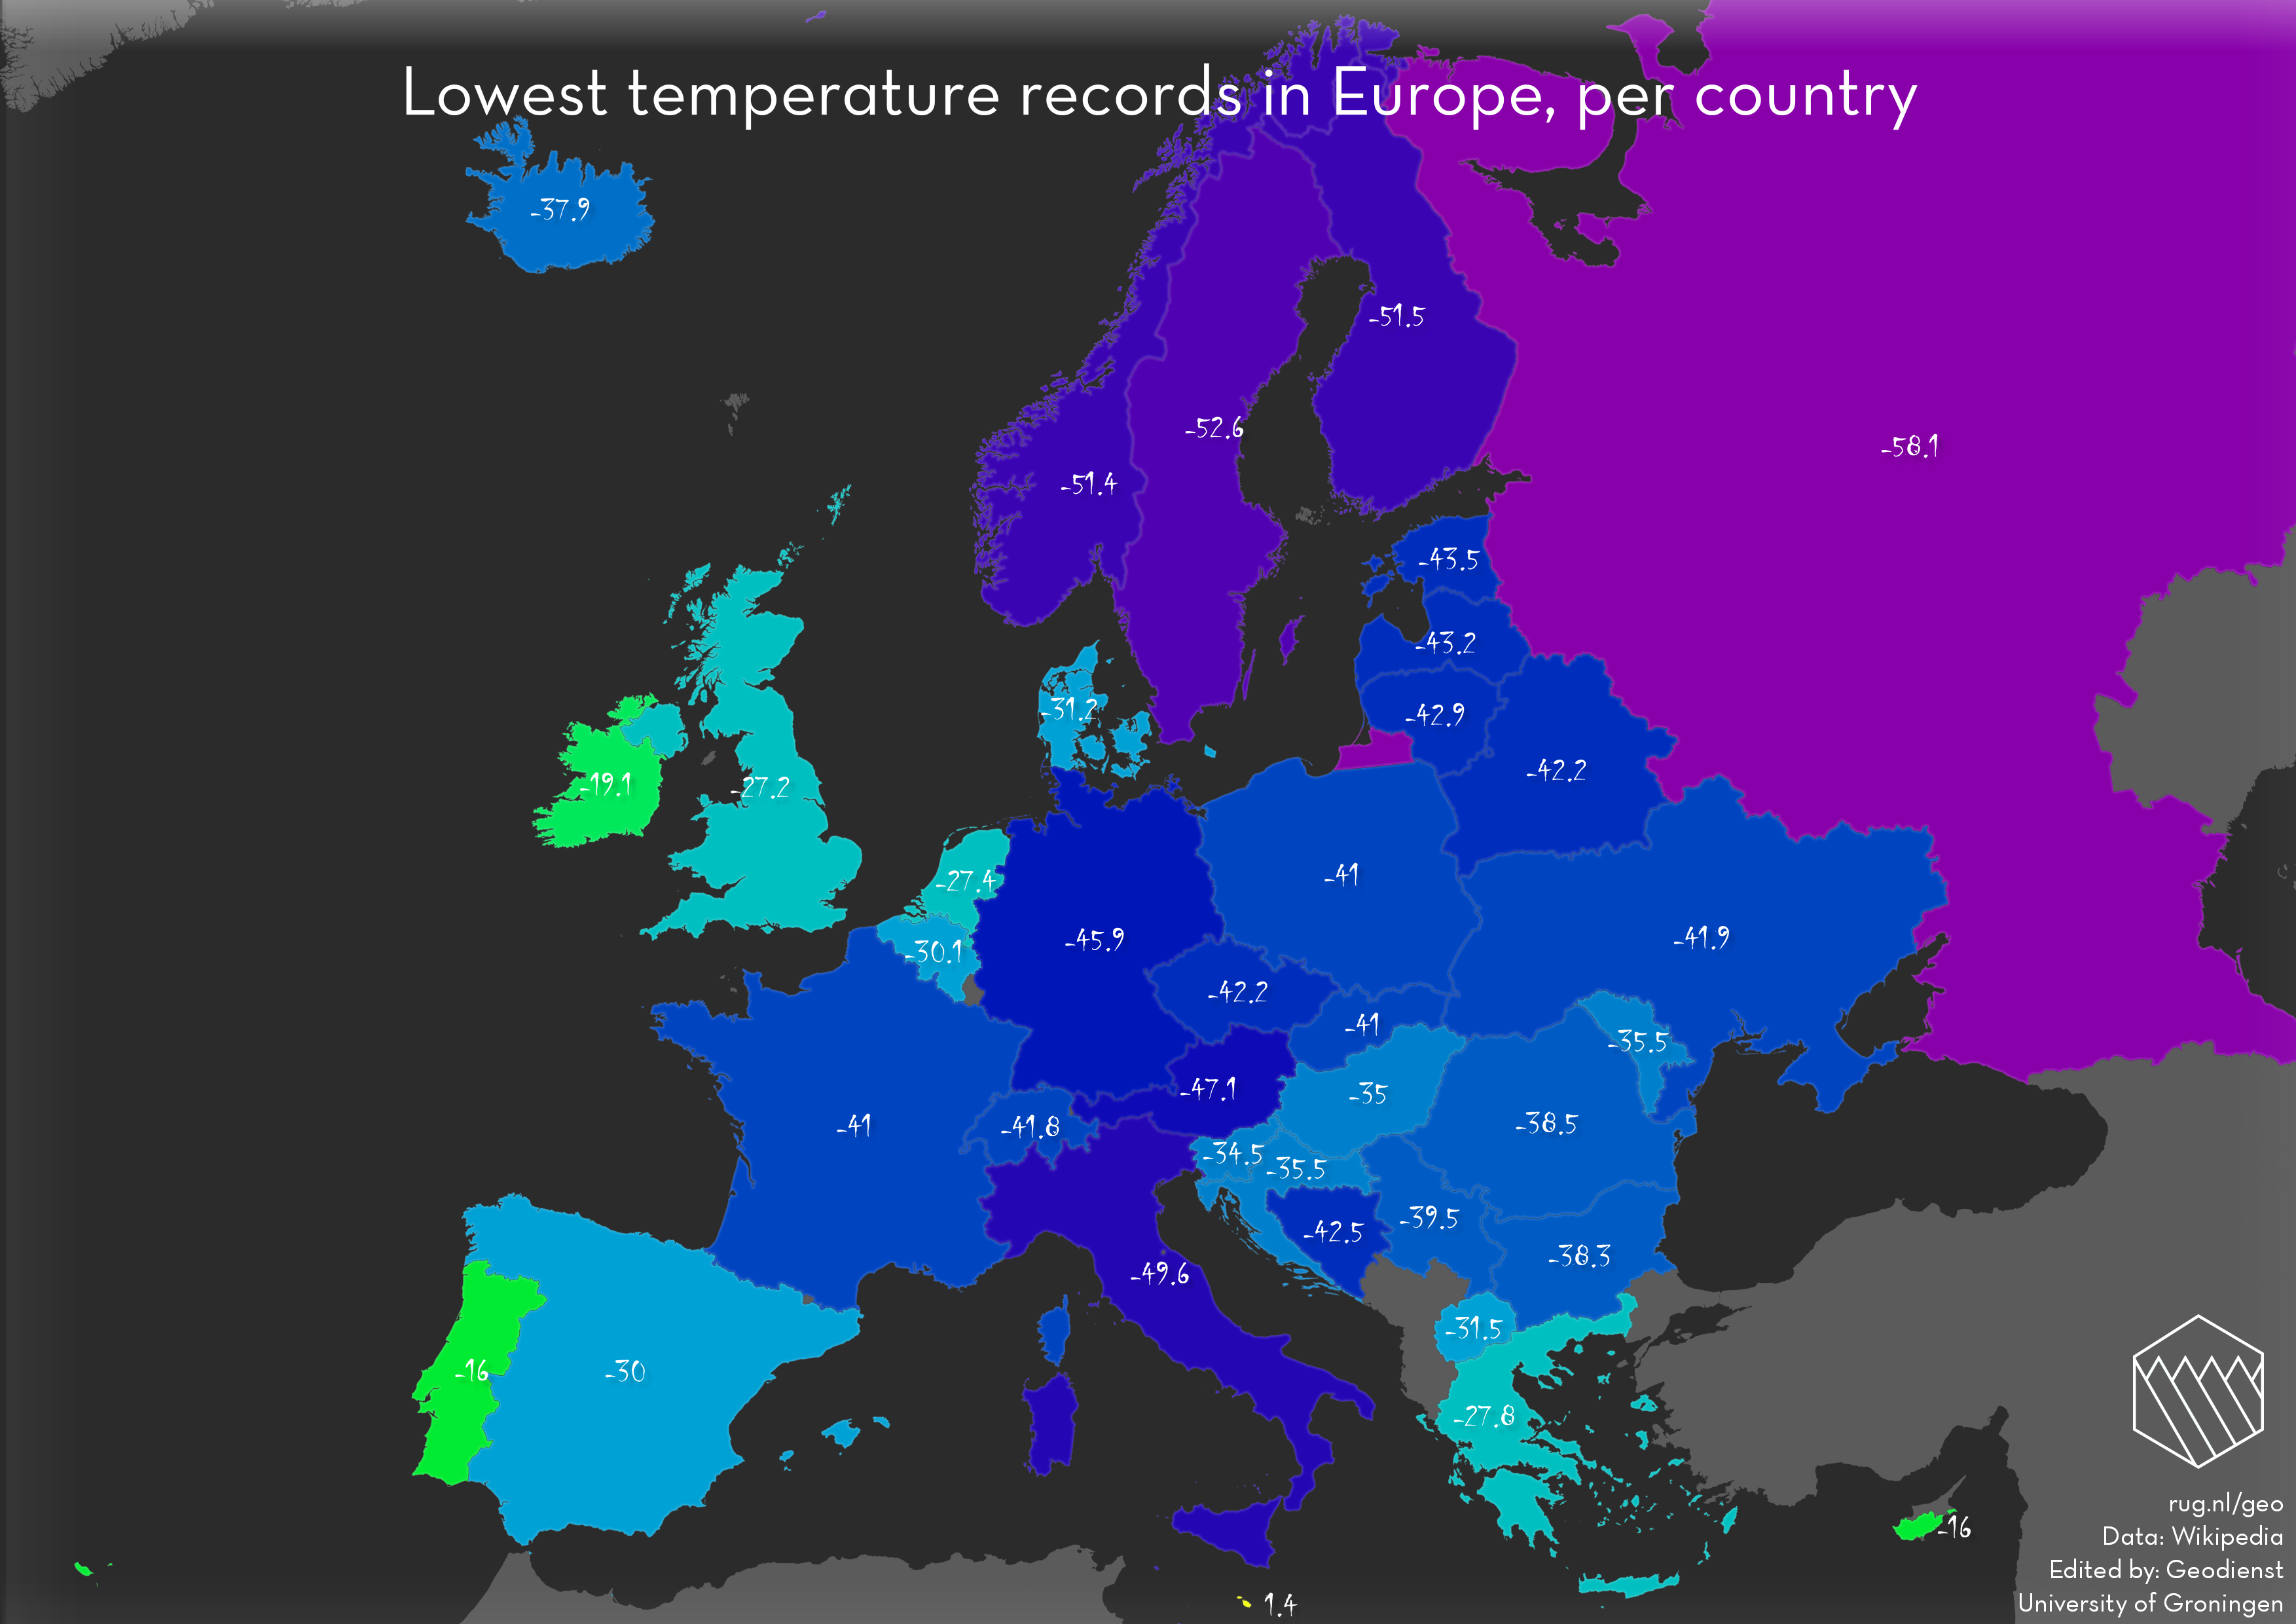 The lowest recorded temperatures in Europe